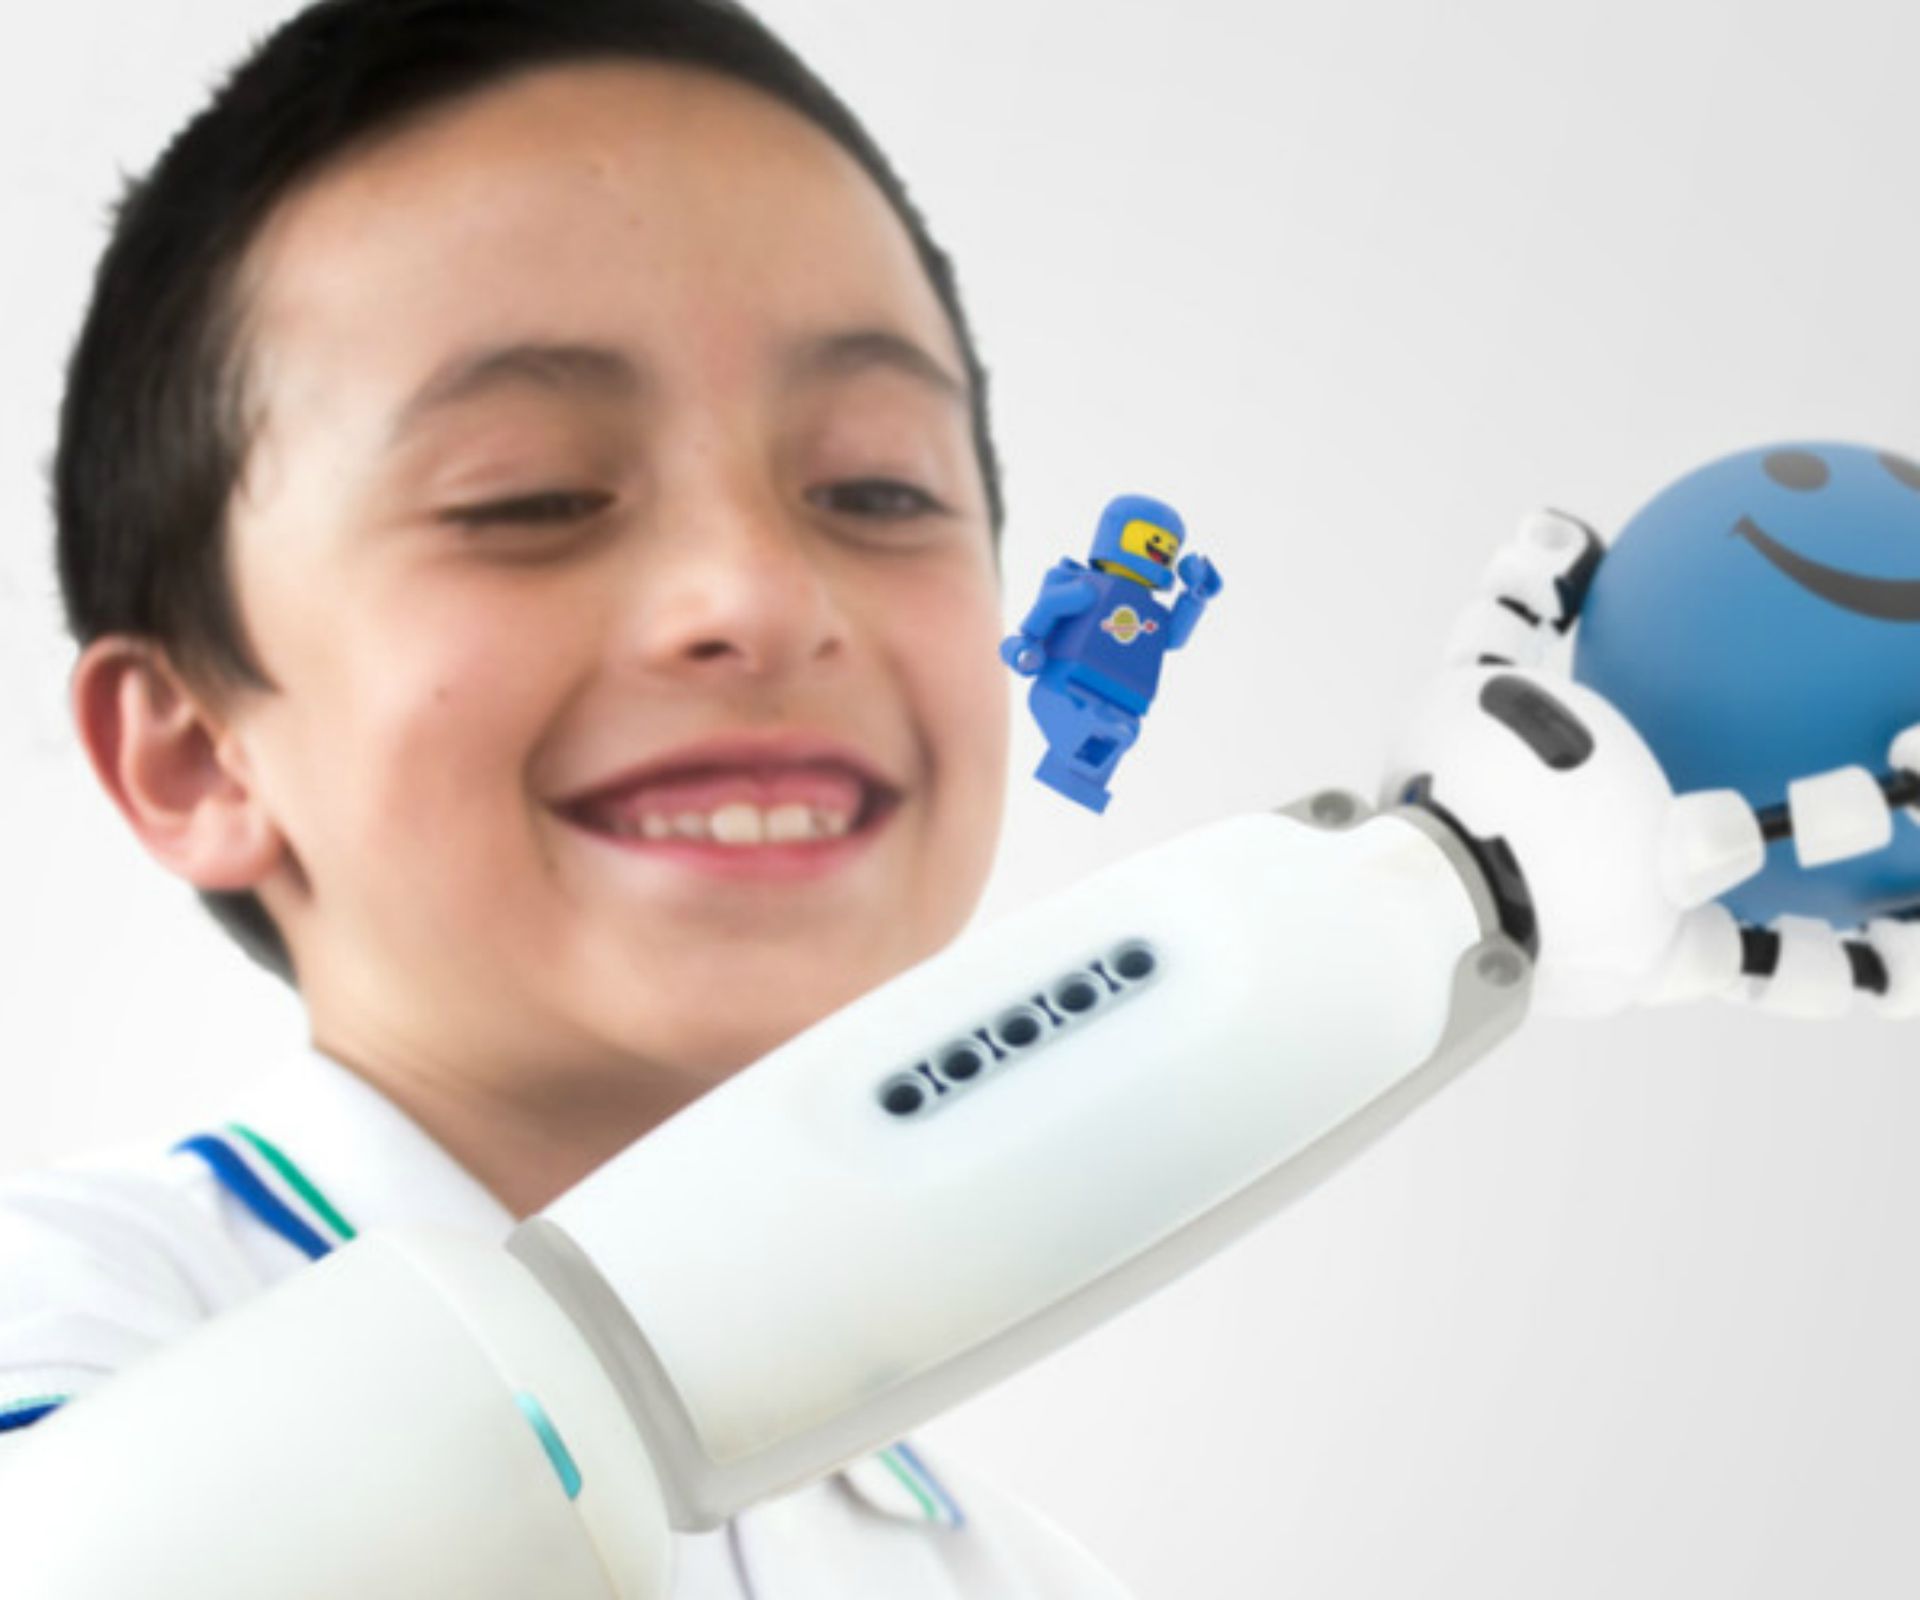 A prosthetic arm kids get to customise with Lego